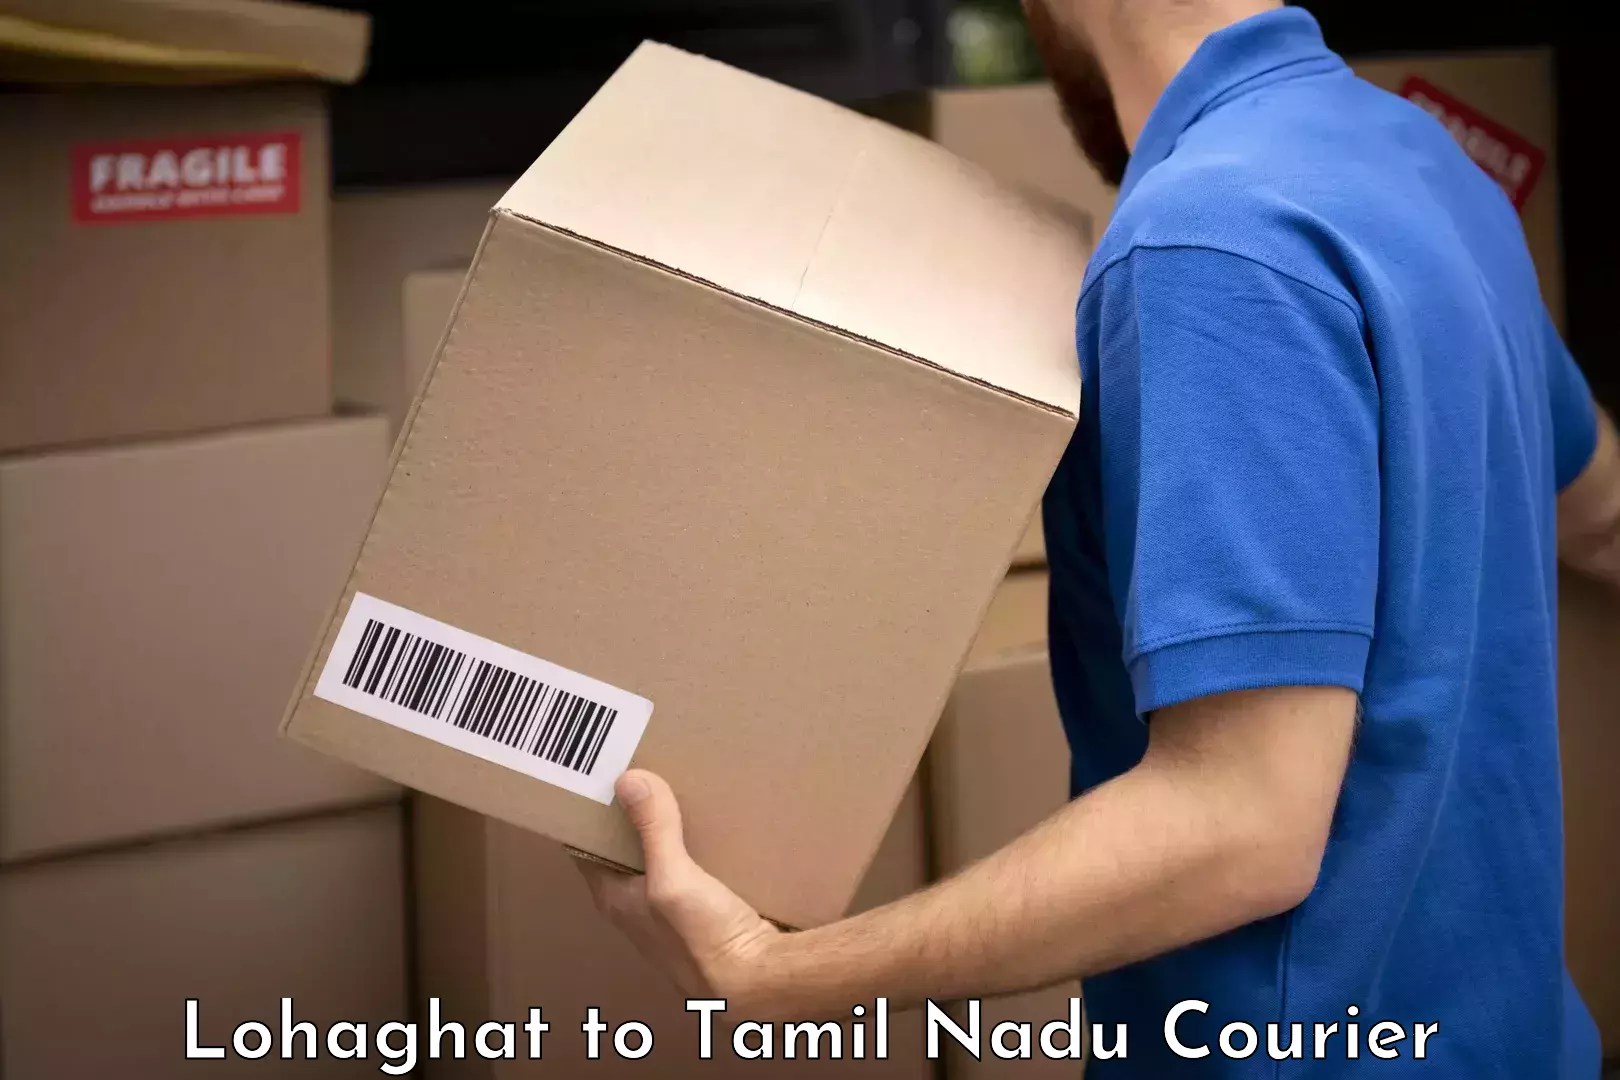 Luggage shipping discounts Lohaghat to Chennai